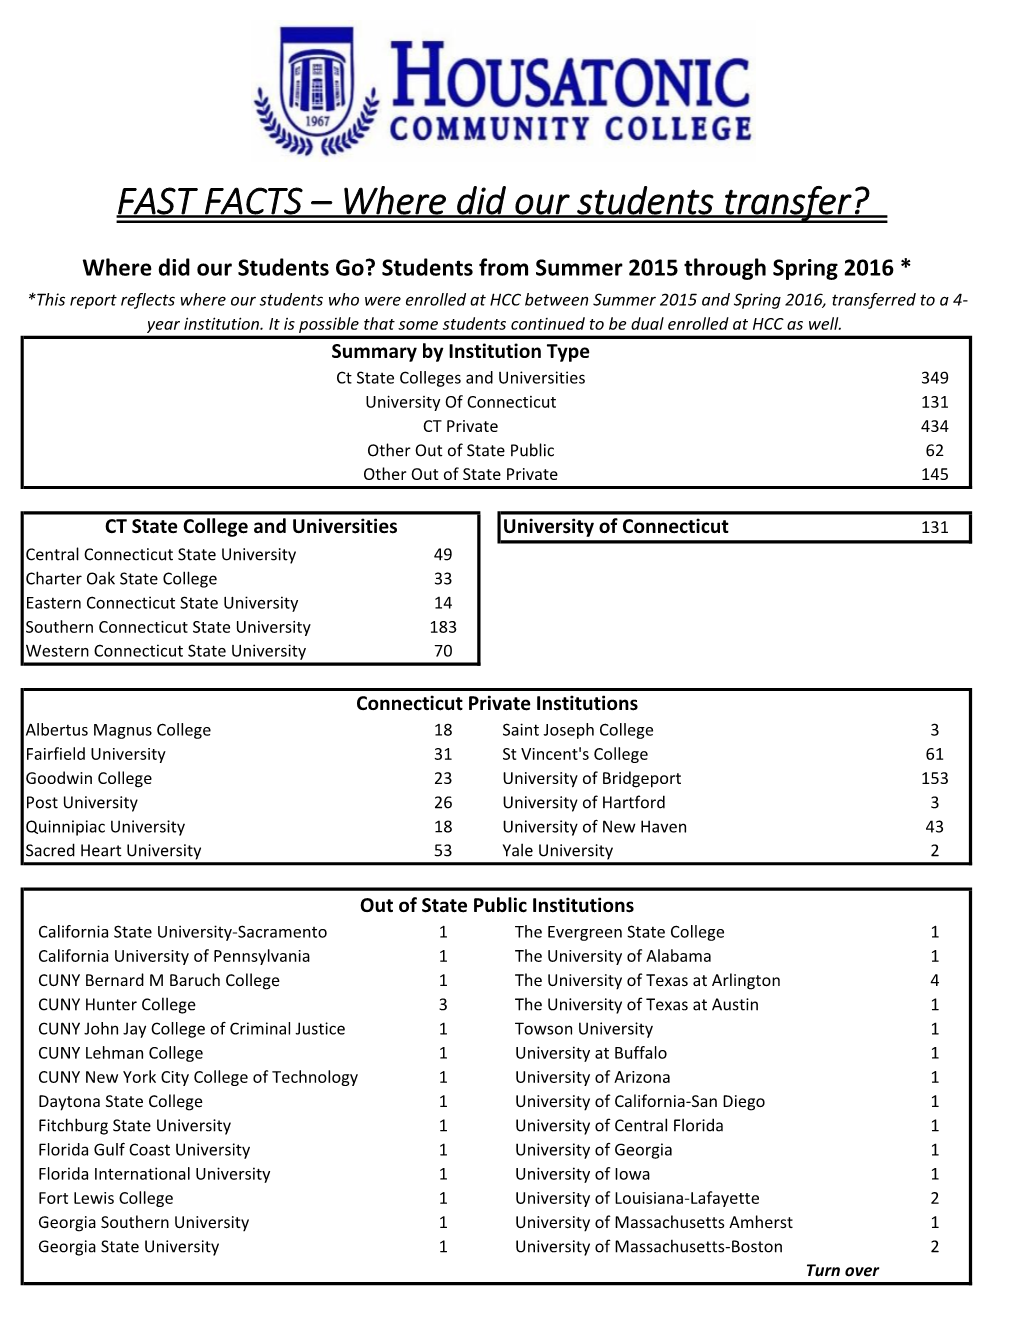 FAST FACTS – Where Did Our Students Transfer?